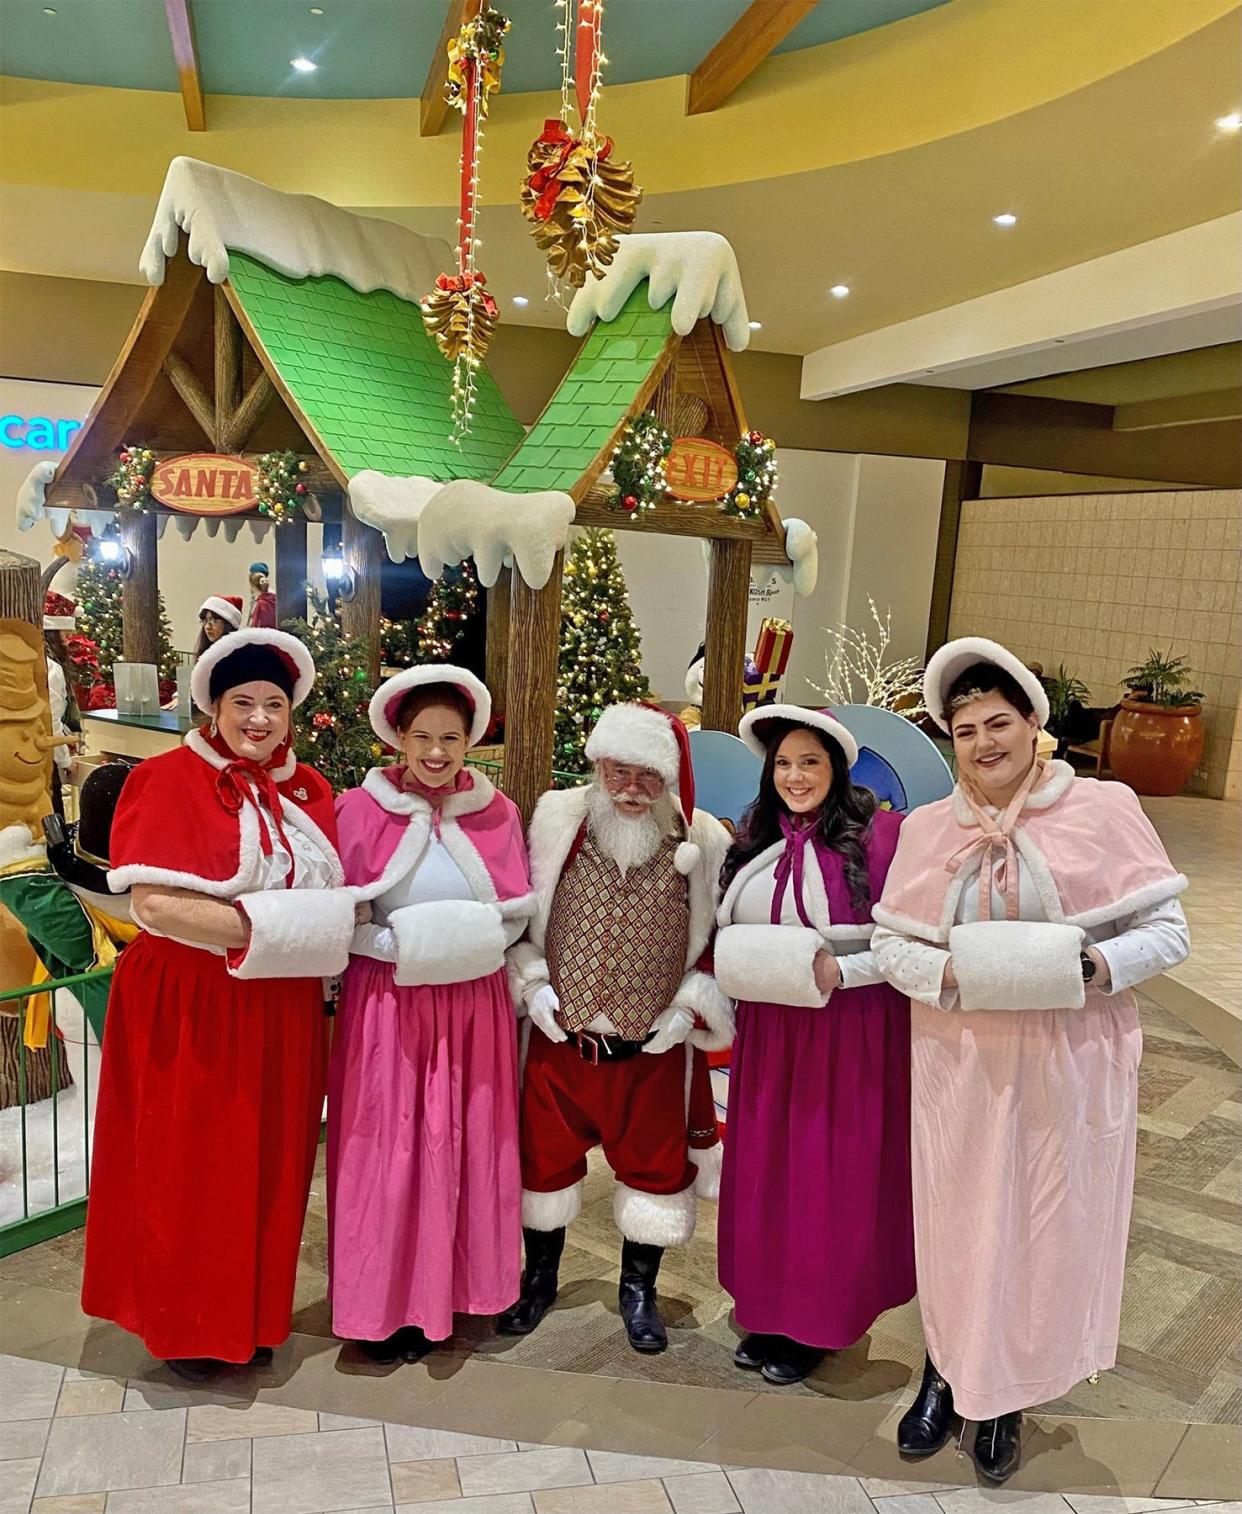 Upon a Star Christmas Carolers will be singing favorite holiday tunes from 5 to 7 p.m. Friday, Dec. 23 at the Pueblo Mall.